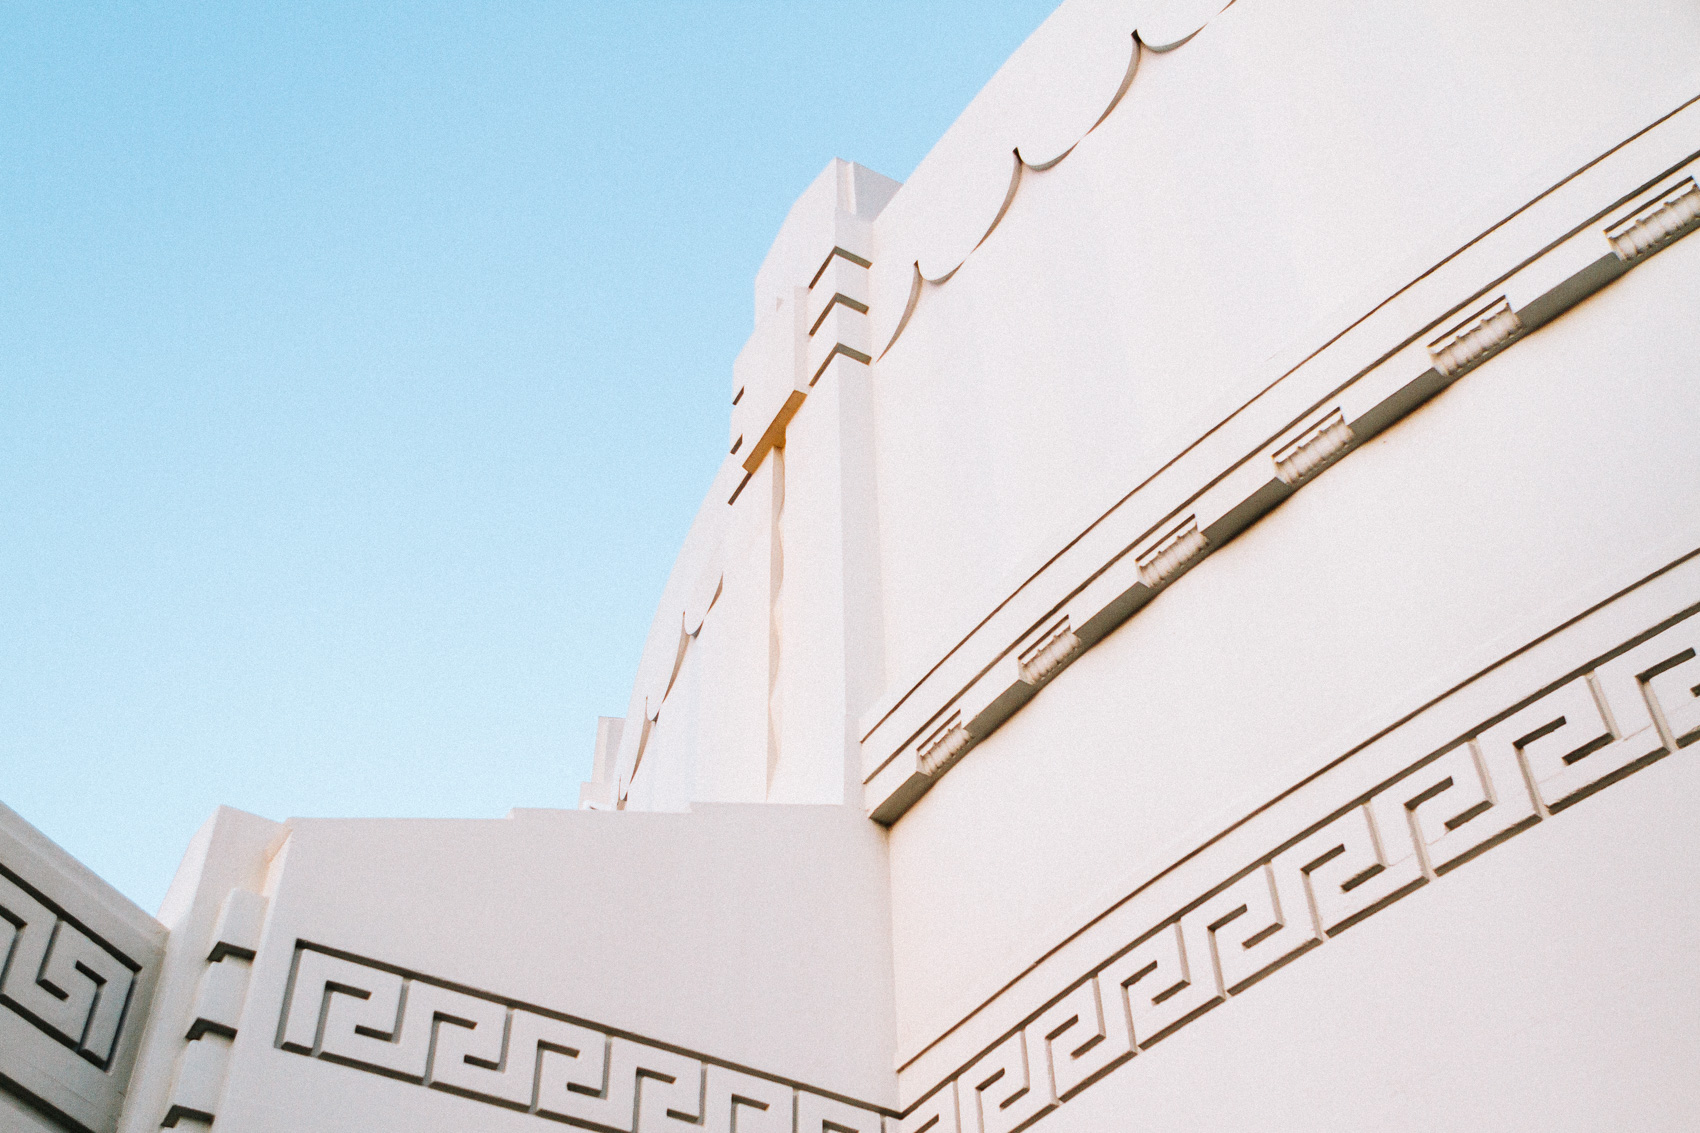 Art Deco details of the Griffith Observatory's exterior